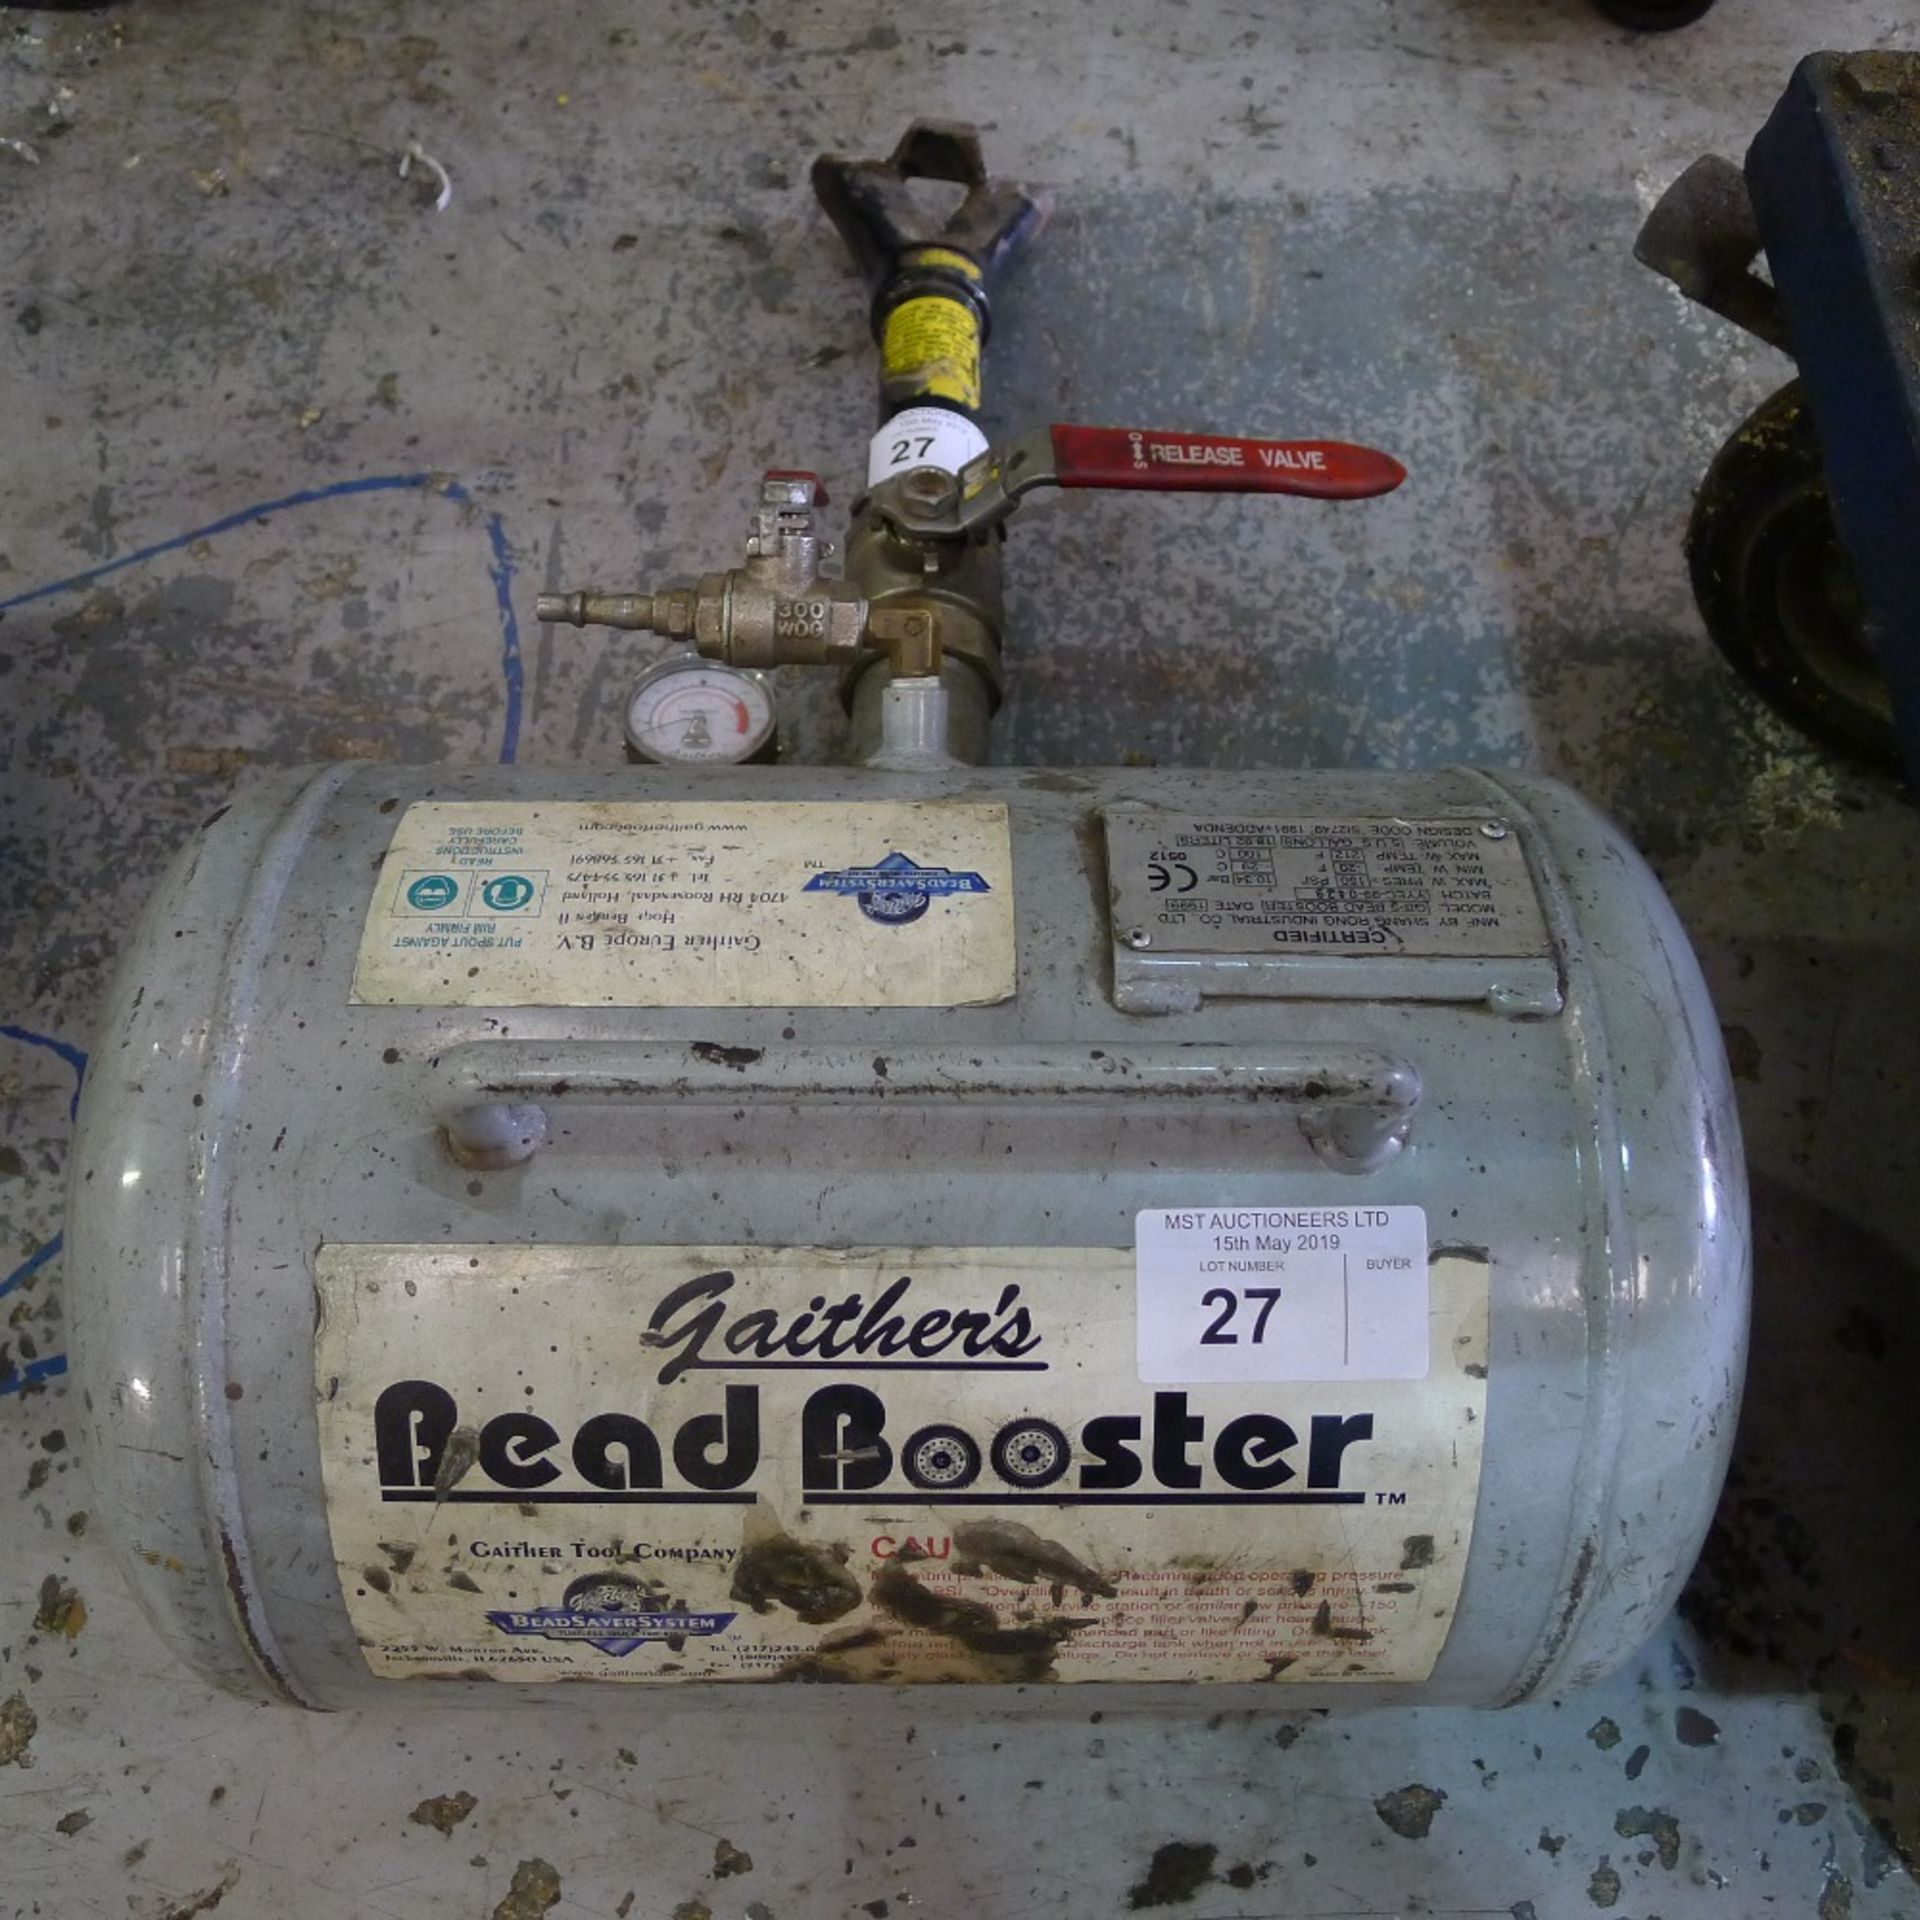 1 Bead Booster by Gaithers type GB5